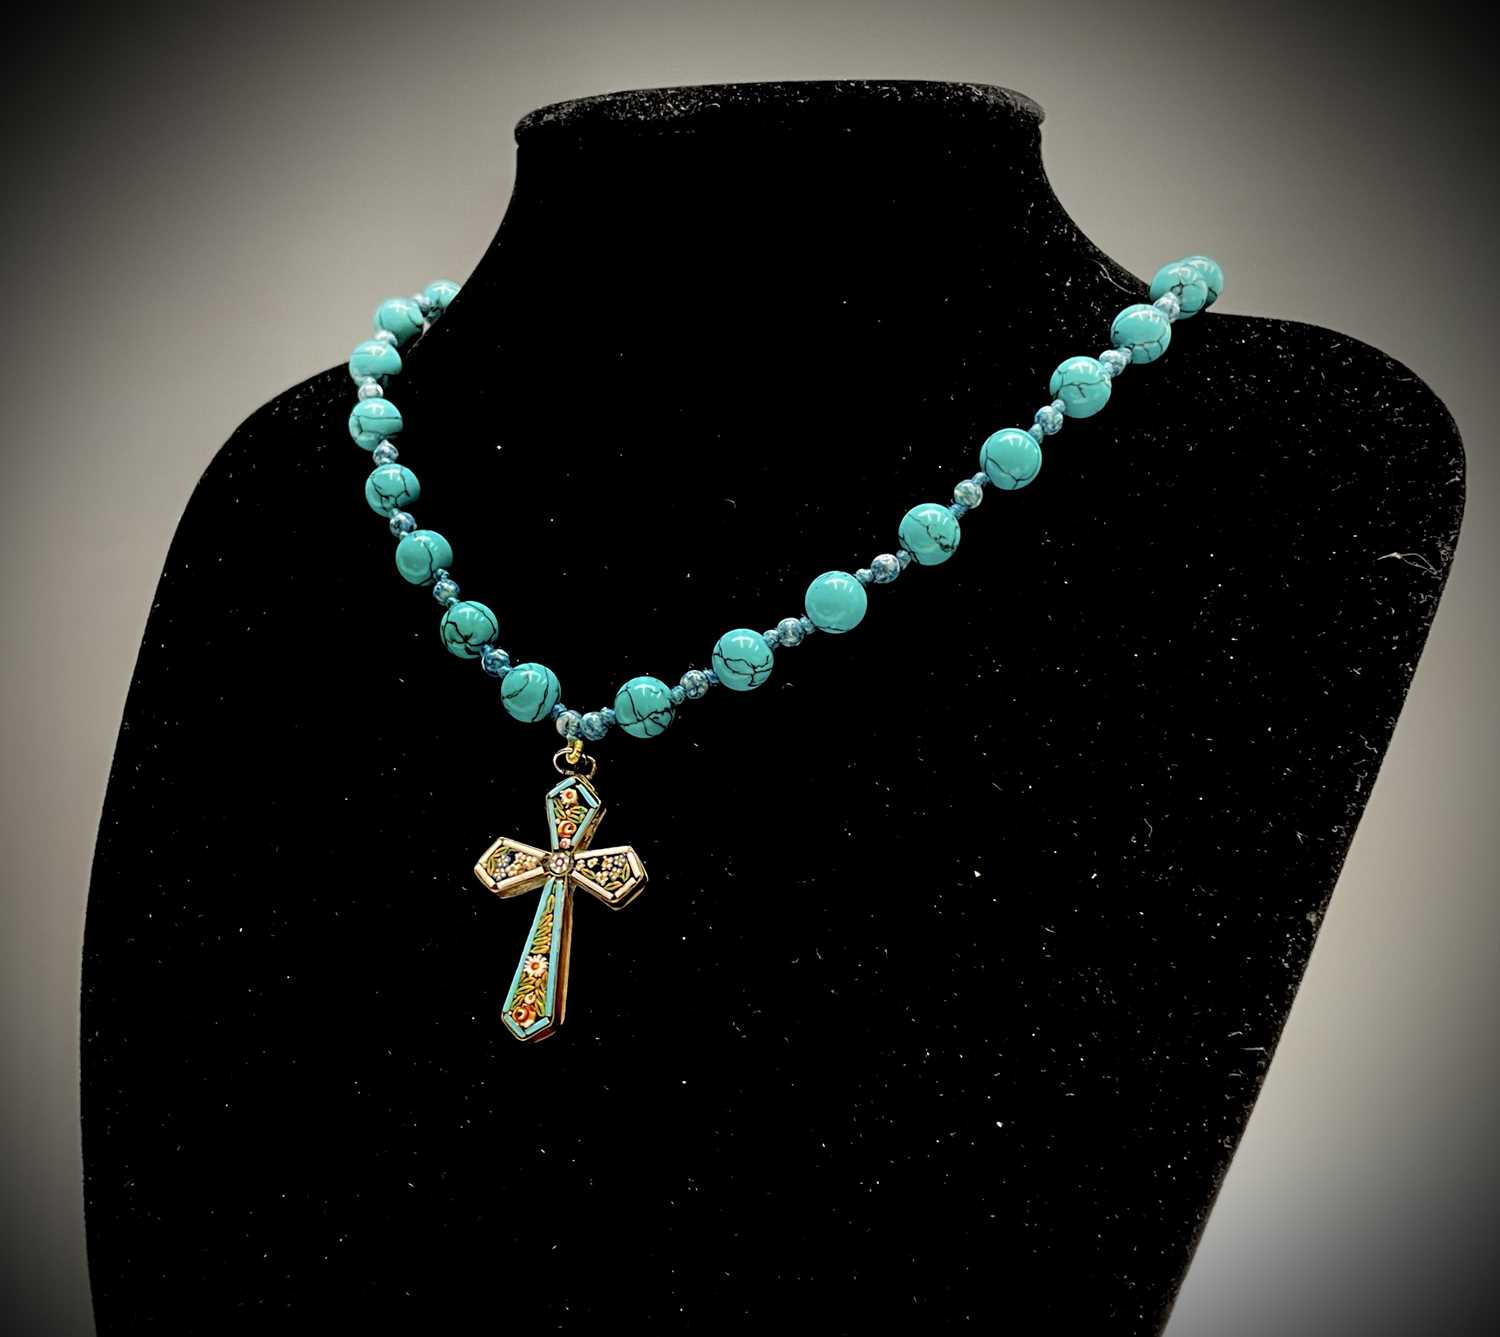 Fifteen rosary bead necklaces, all with unique decorative crosses. - Image 2 of 20